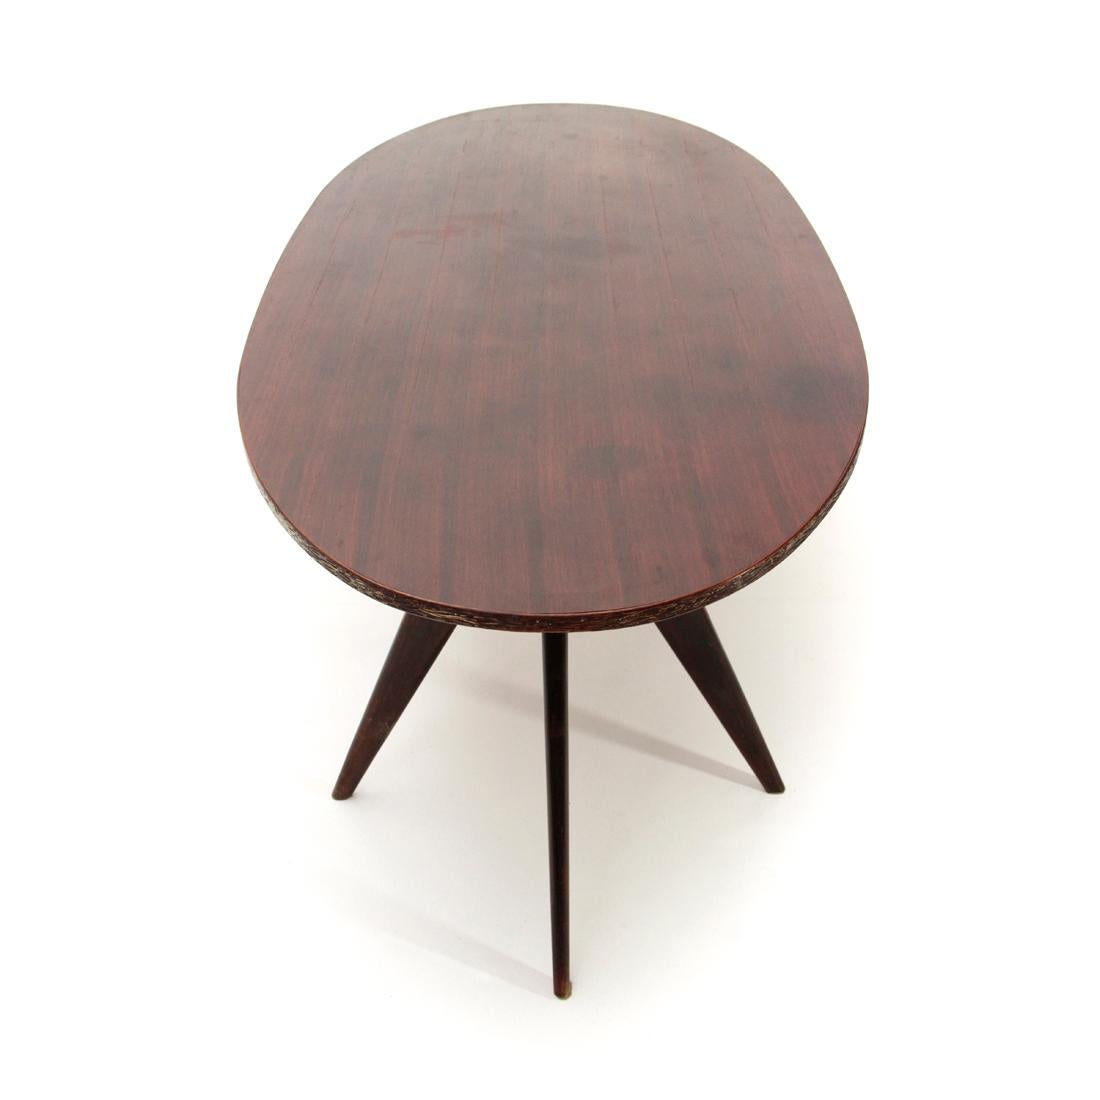 Mid-20th Century Italian Midcentury Dining Table with Oval Top, 1950s